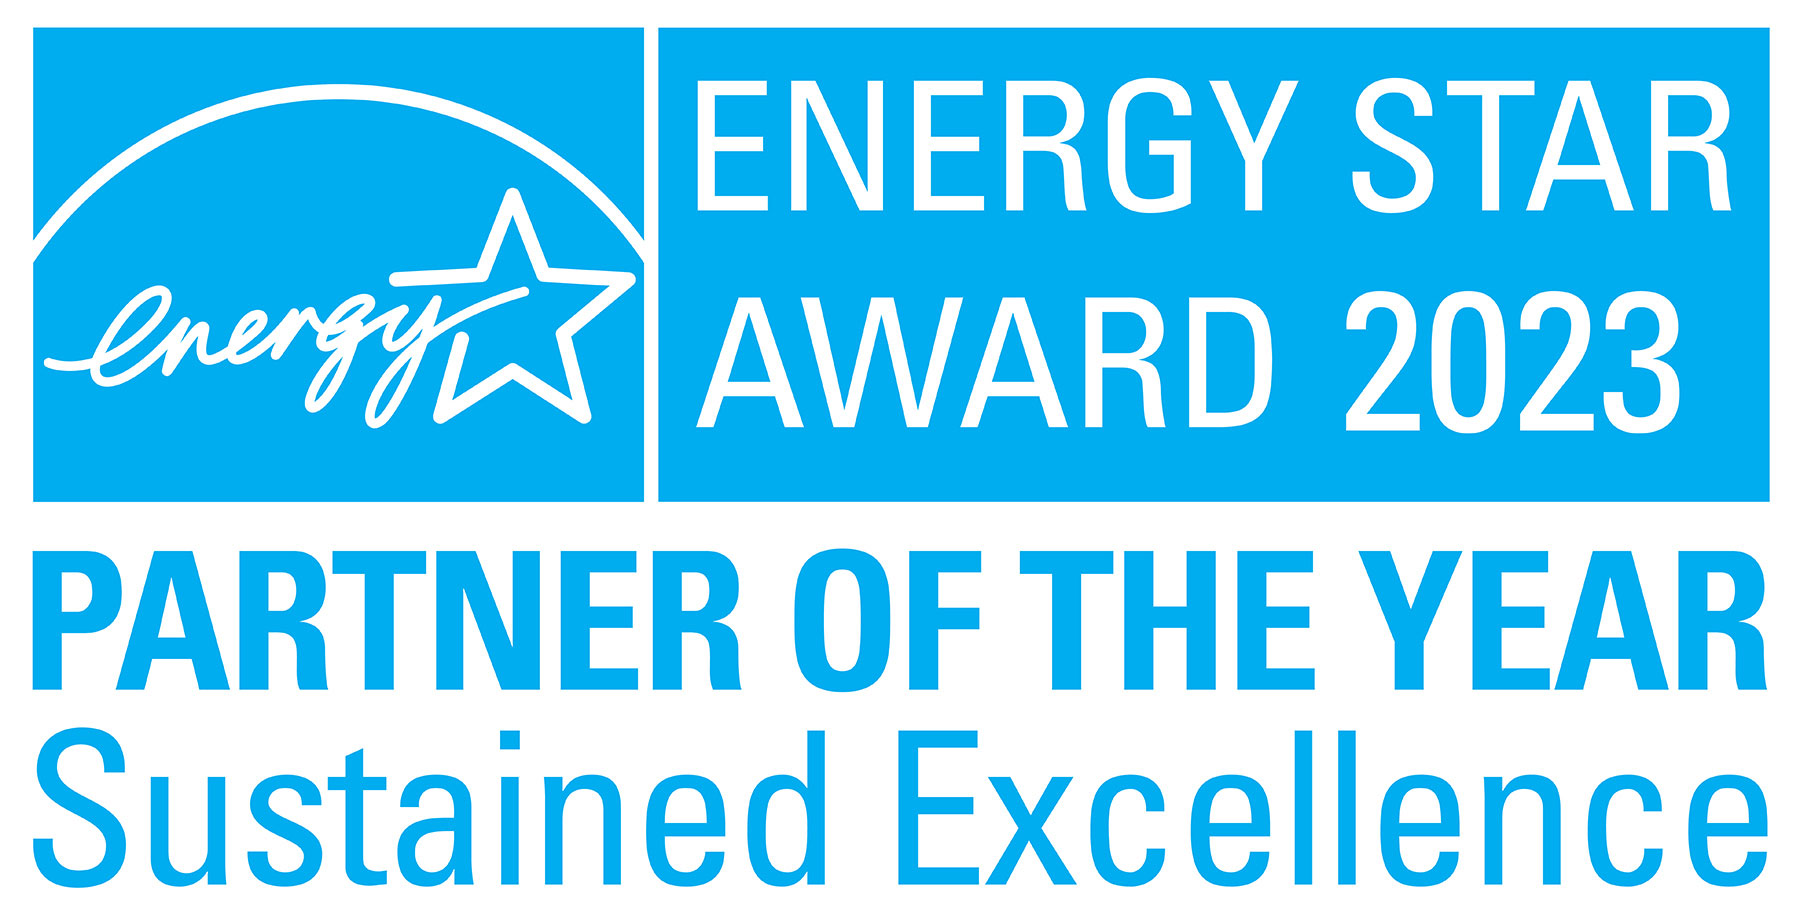 ENGERY STAR Partner of the Year